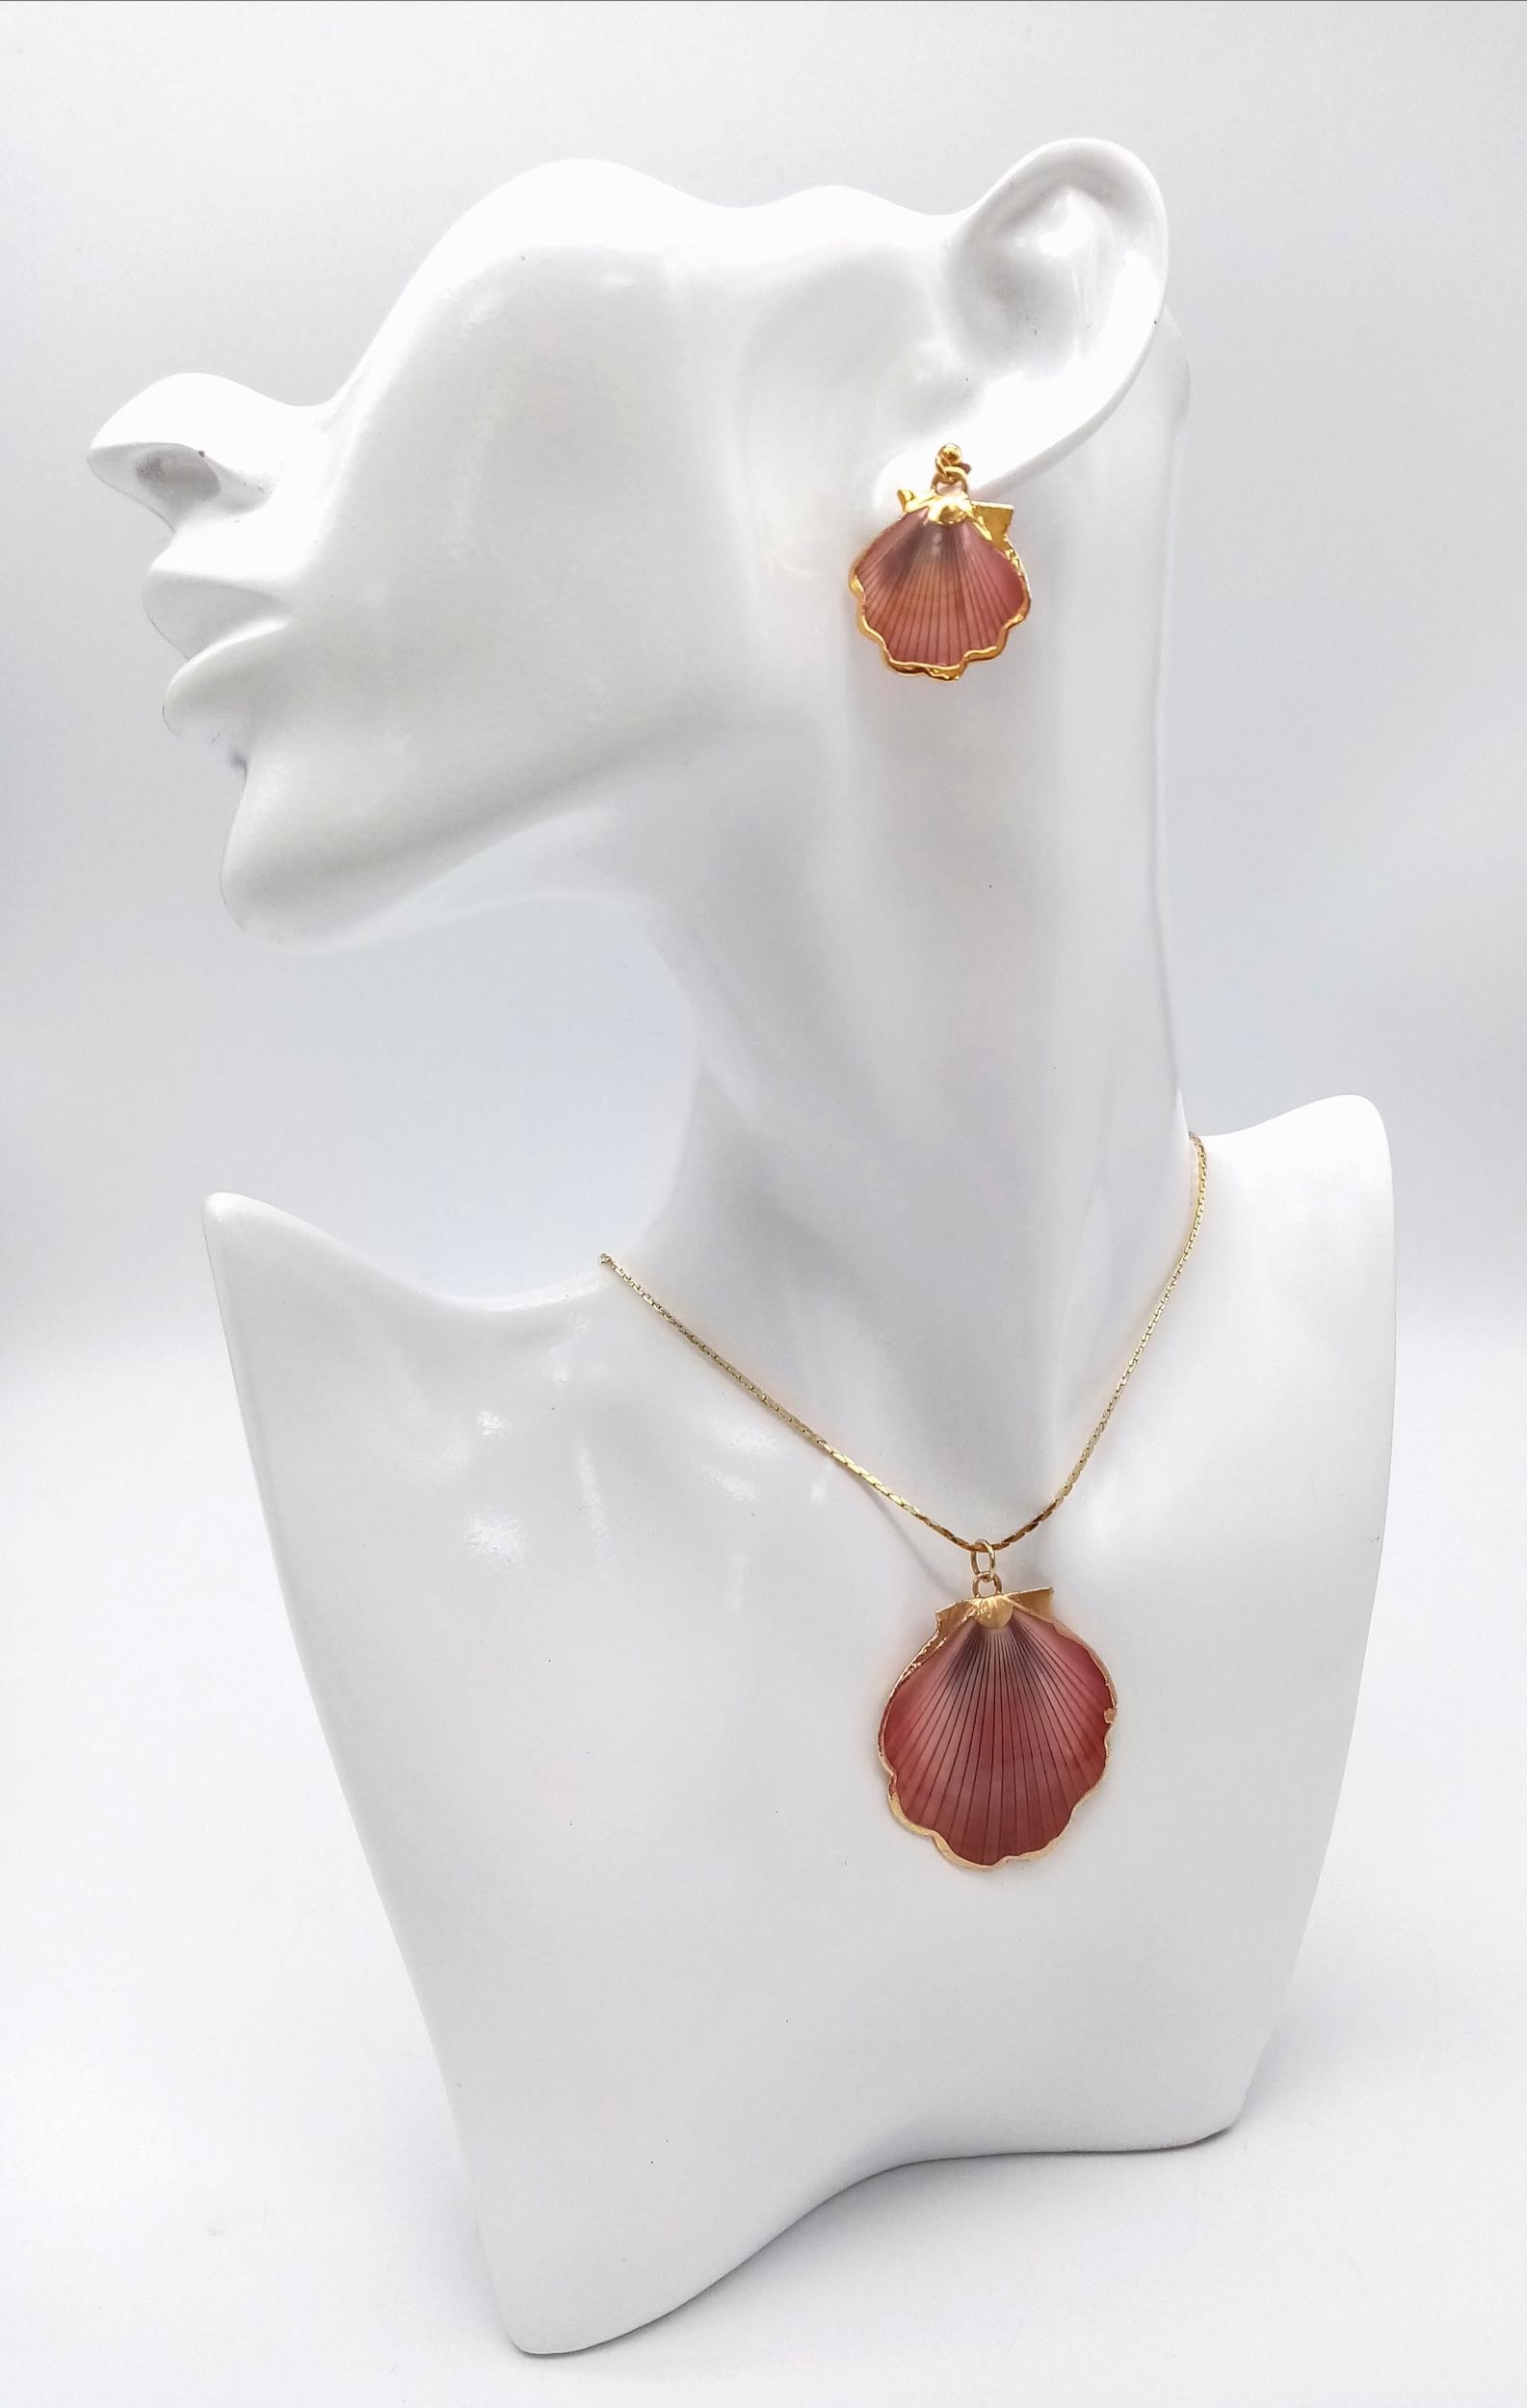 A 24 Carat Gold Plated Sea Shell Design Necklace and Matching Earring Set. Necklace 60cm Length, - Image 3 of 4